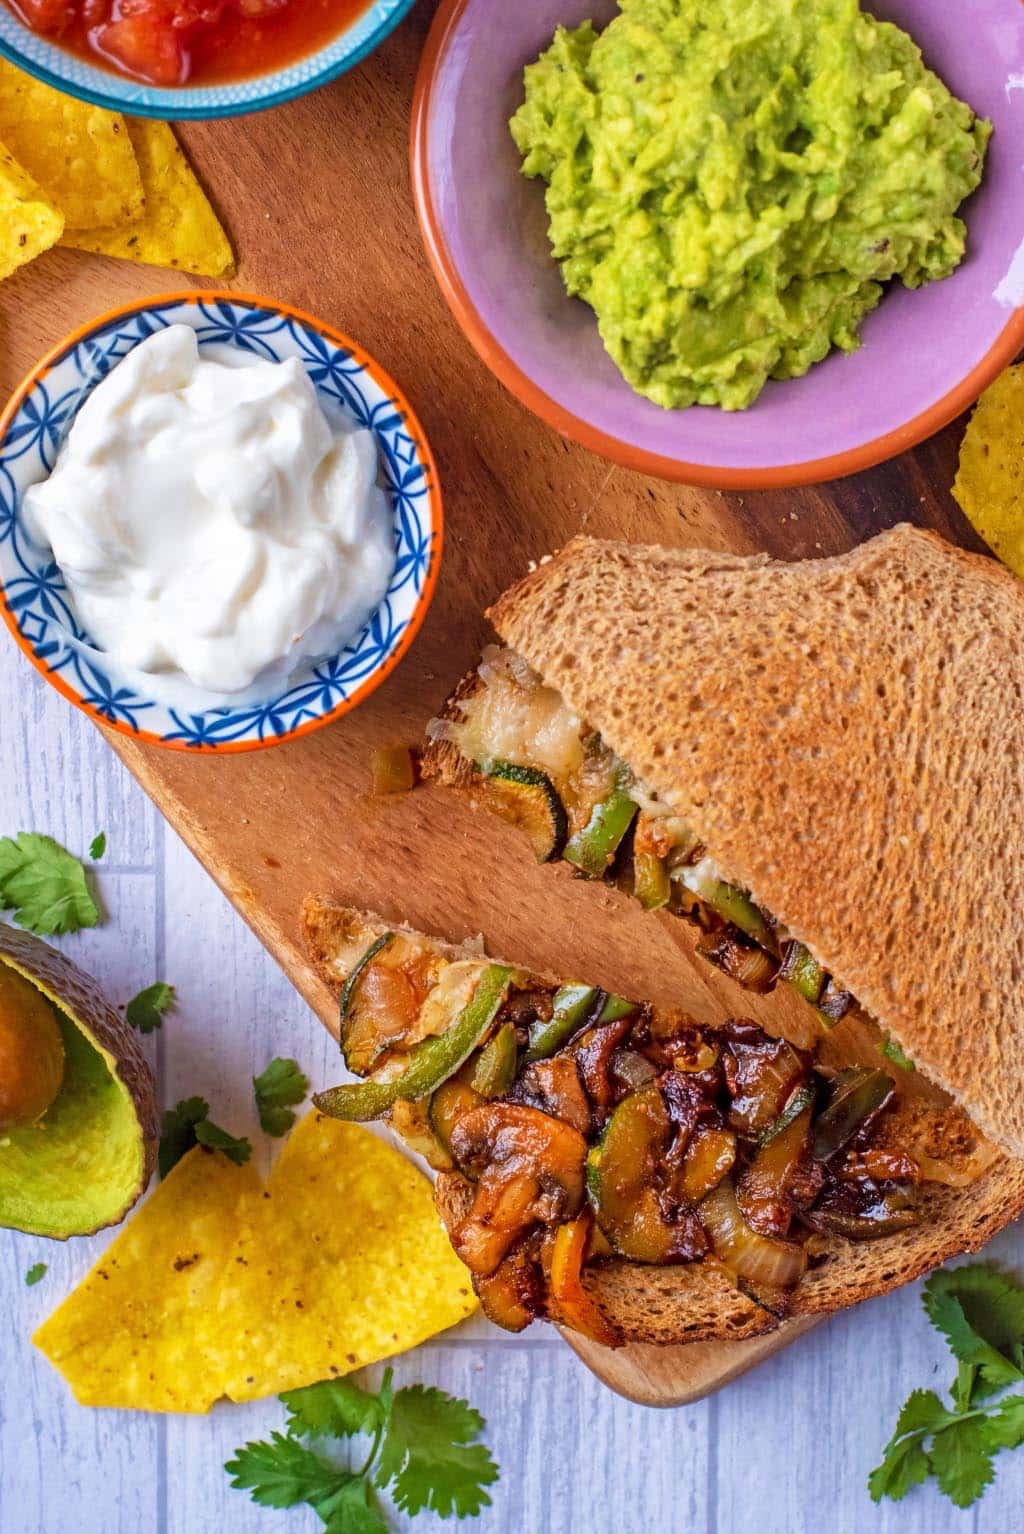 Toasted vegetable sandwich on a board with small bowls of guacamole and sour cream.